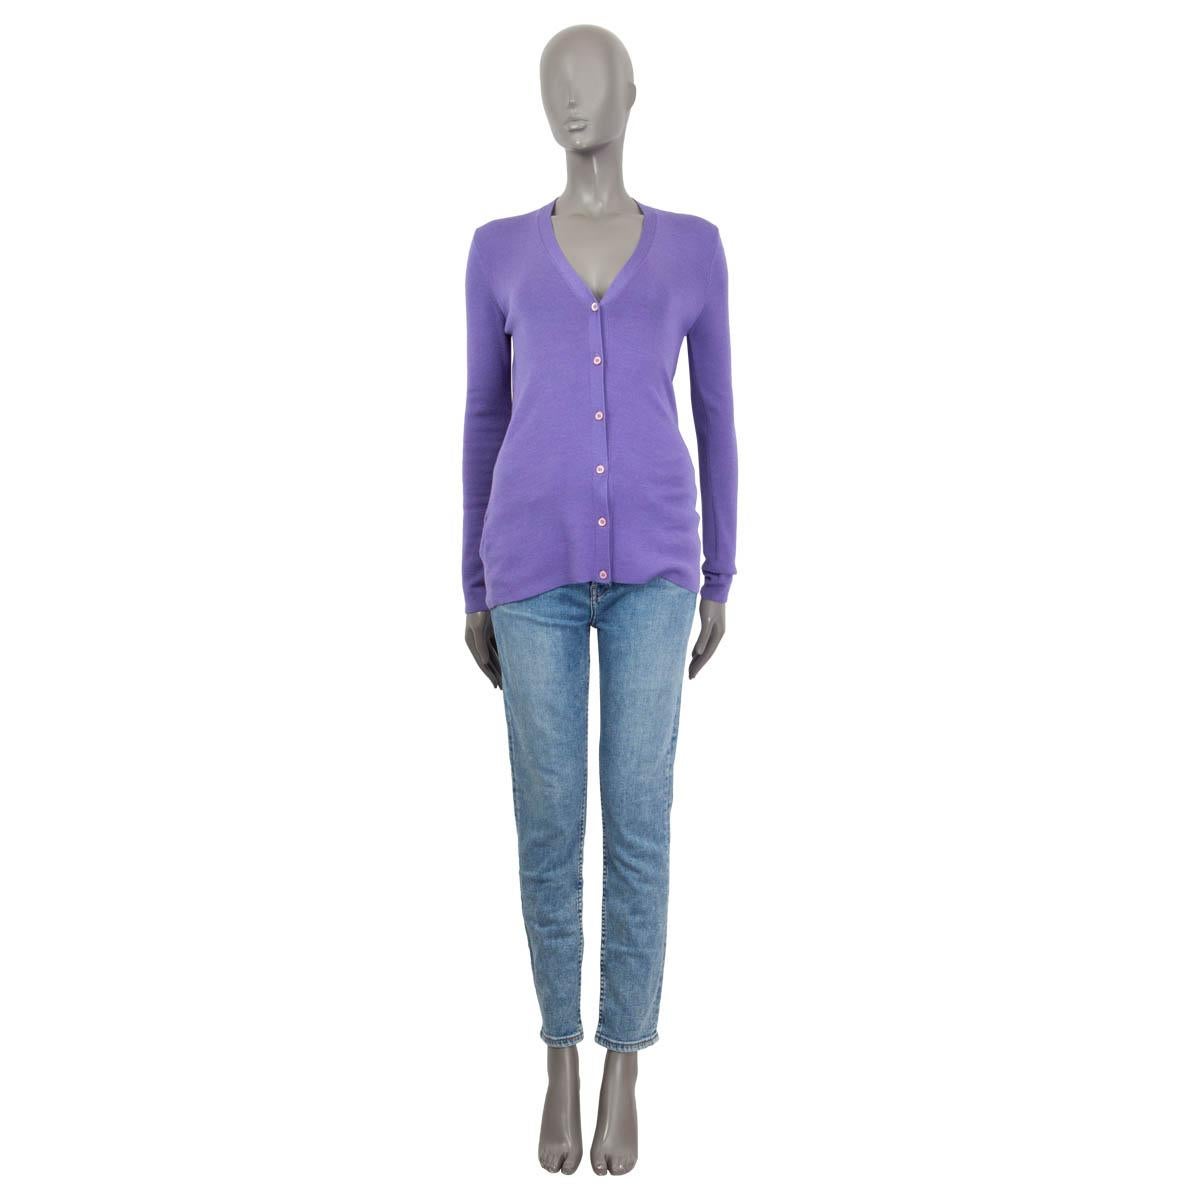 100% authentic Prada cardigan in light purple cashmere (70%) and silk (30%). Comes with a v-neck and opens with five pink buttons on the front. Unlined. Has been worn and is in excellent condition. 

Measurements
Tag Size	44
Size	L
Shoulder